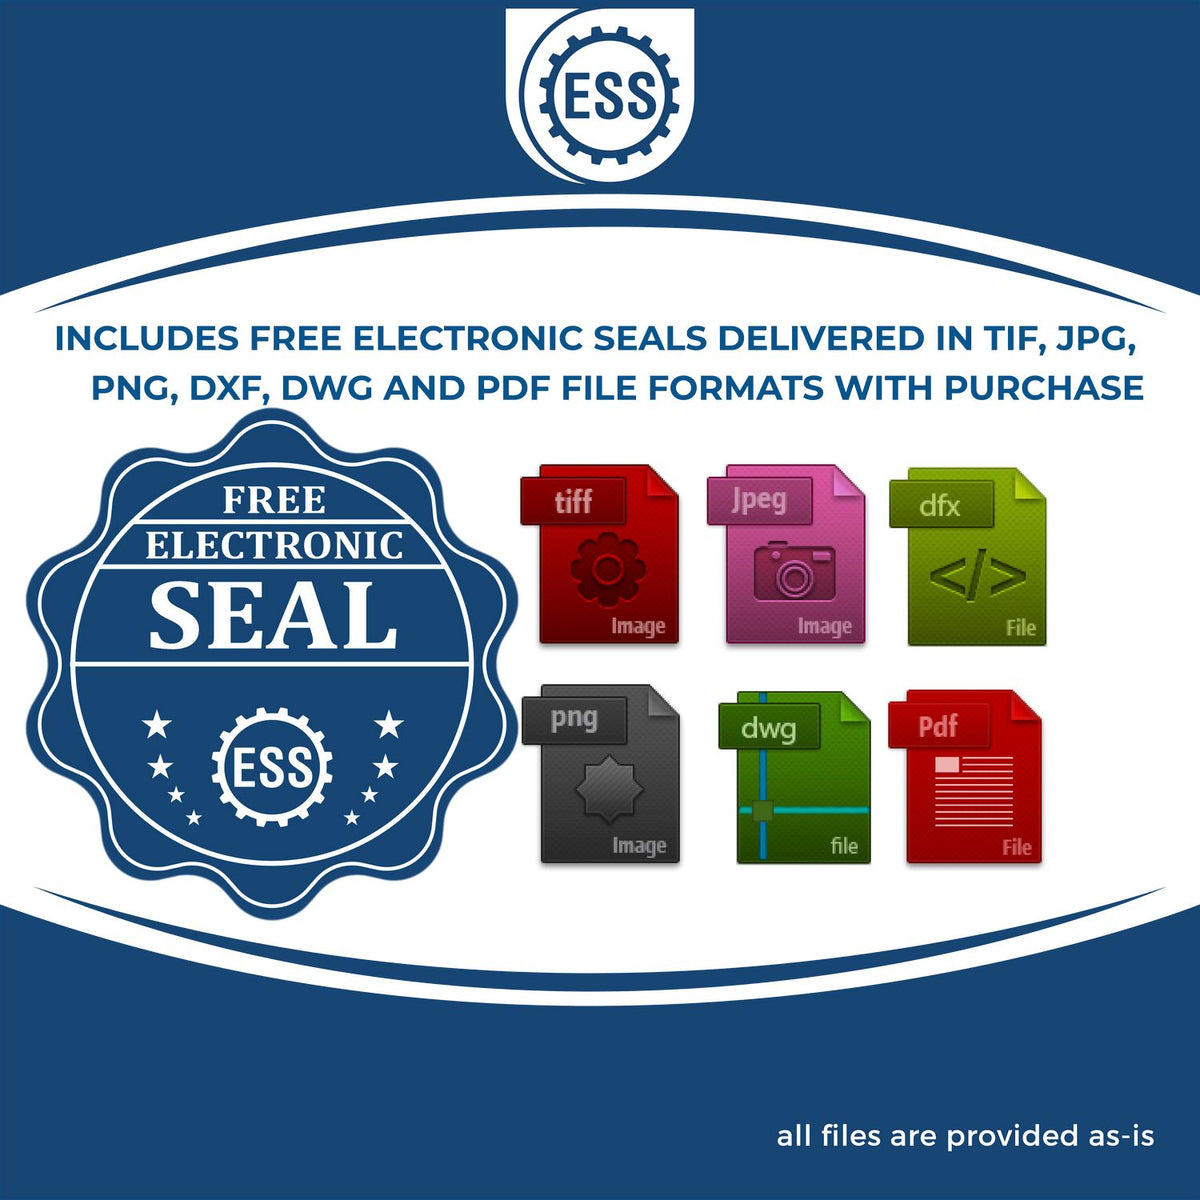 An infographic for the free electronic seal for the Hybrid Ohio Land Surveyor Seal illustrating the different file type icons such as DXF, DWG, TIF, JPG and PNG.